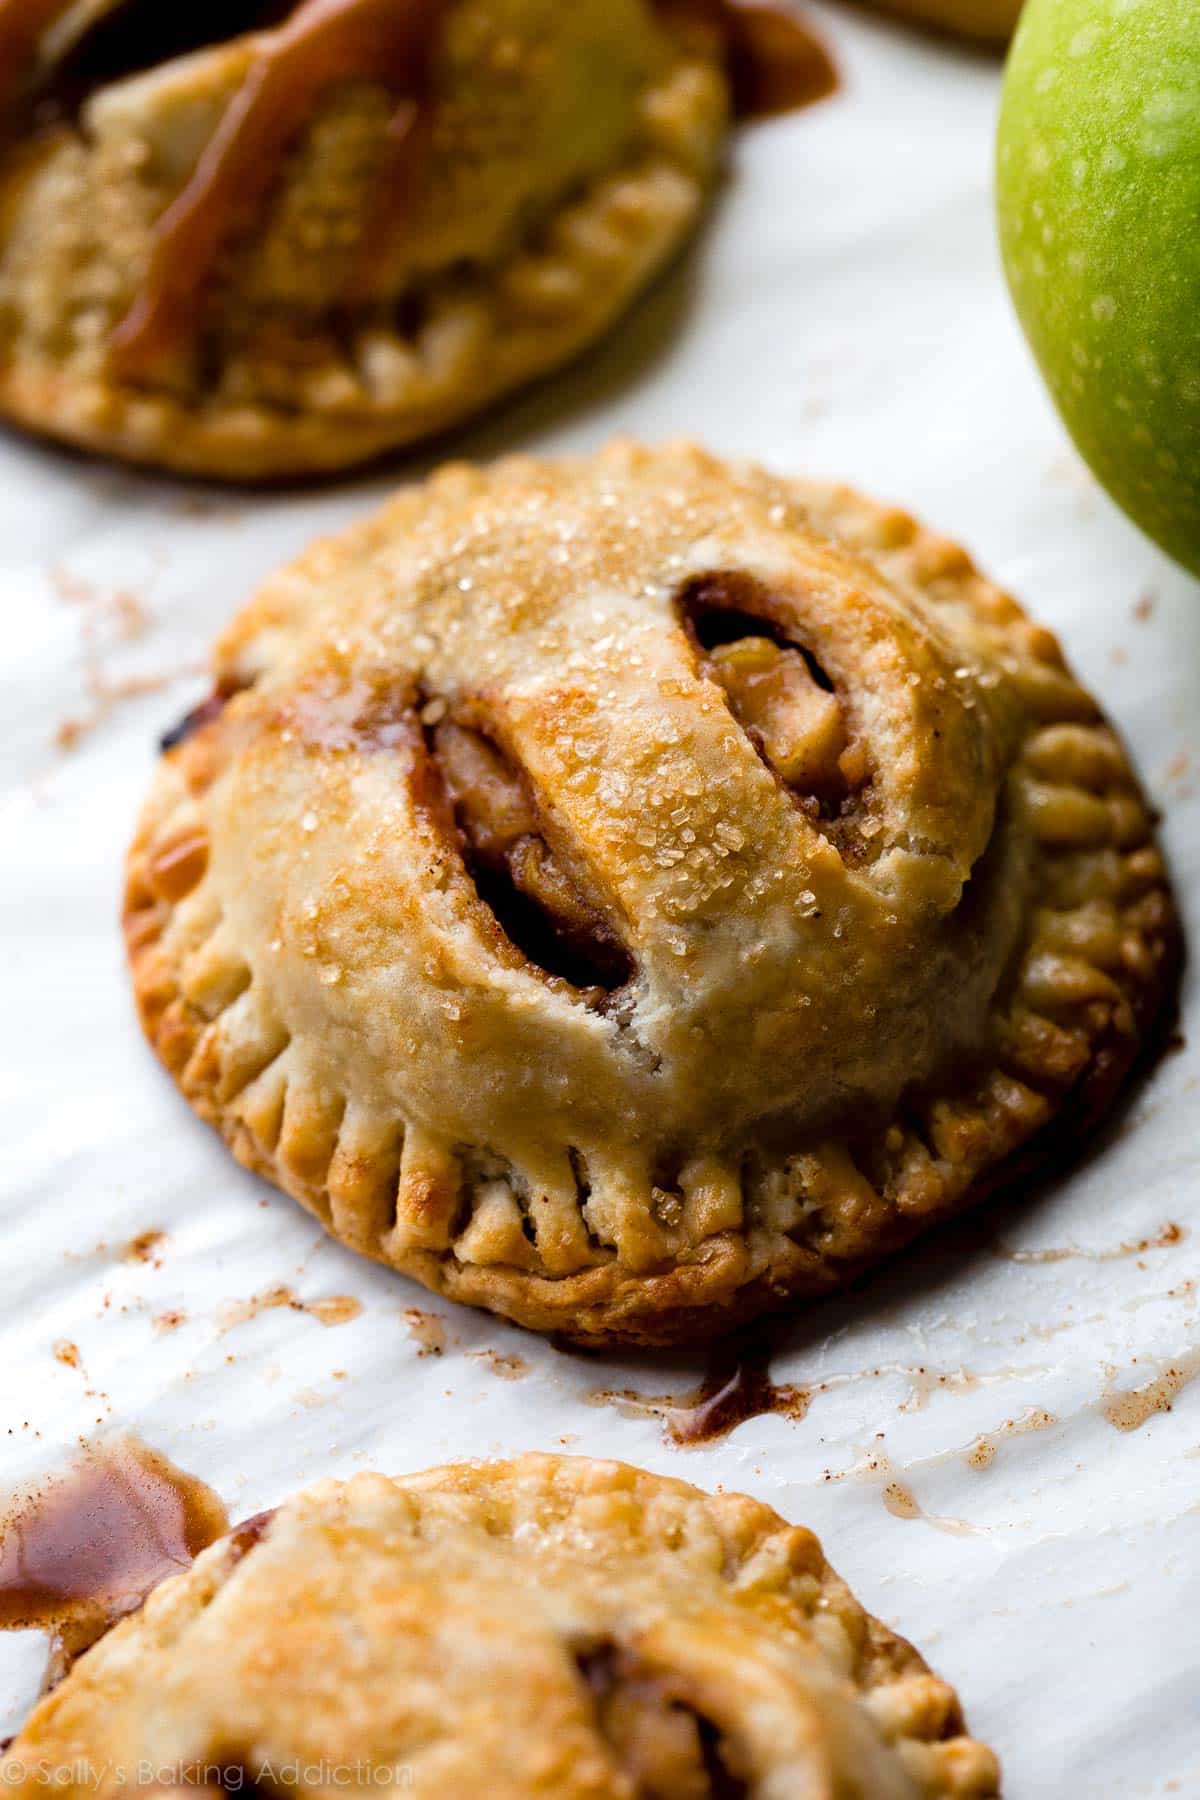 Apple hand pies after baking